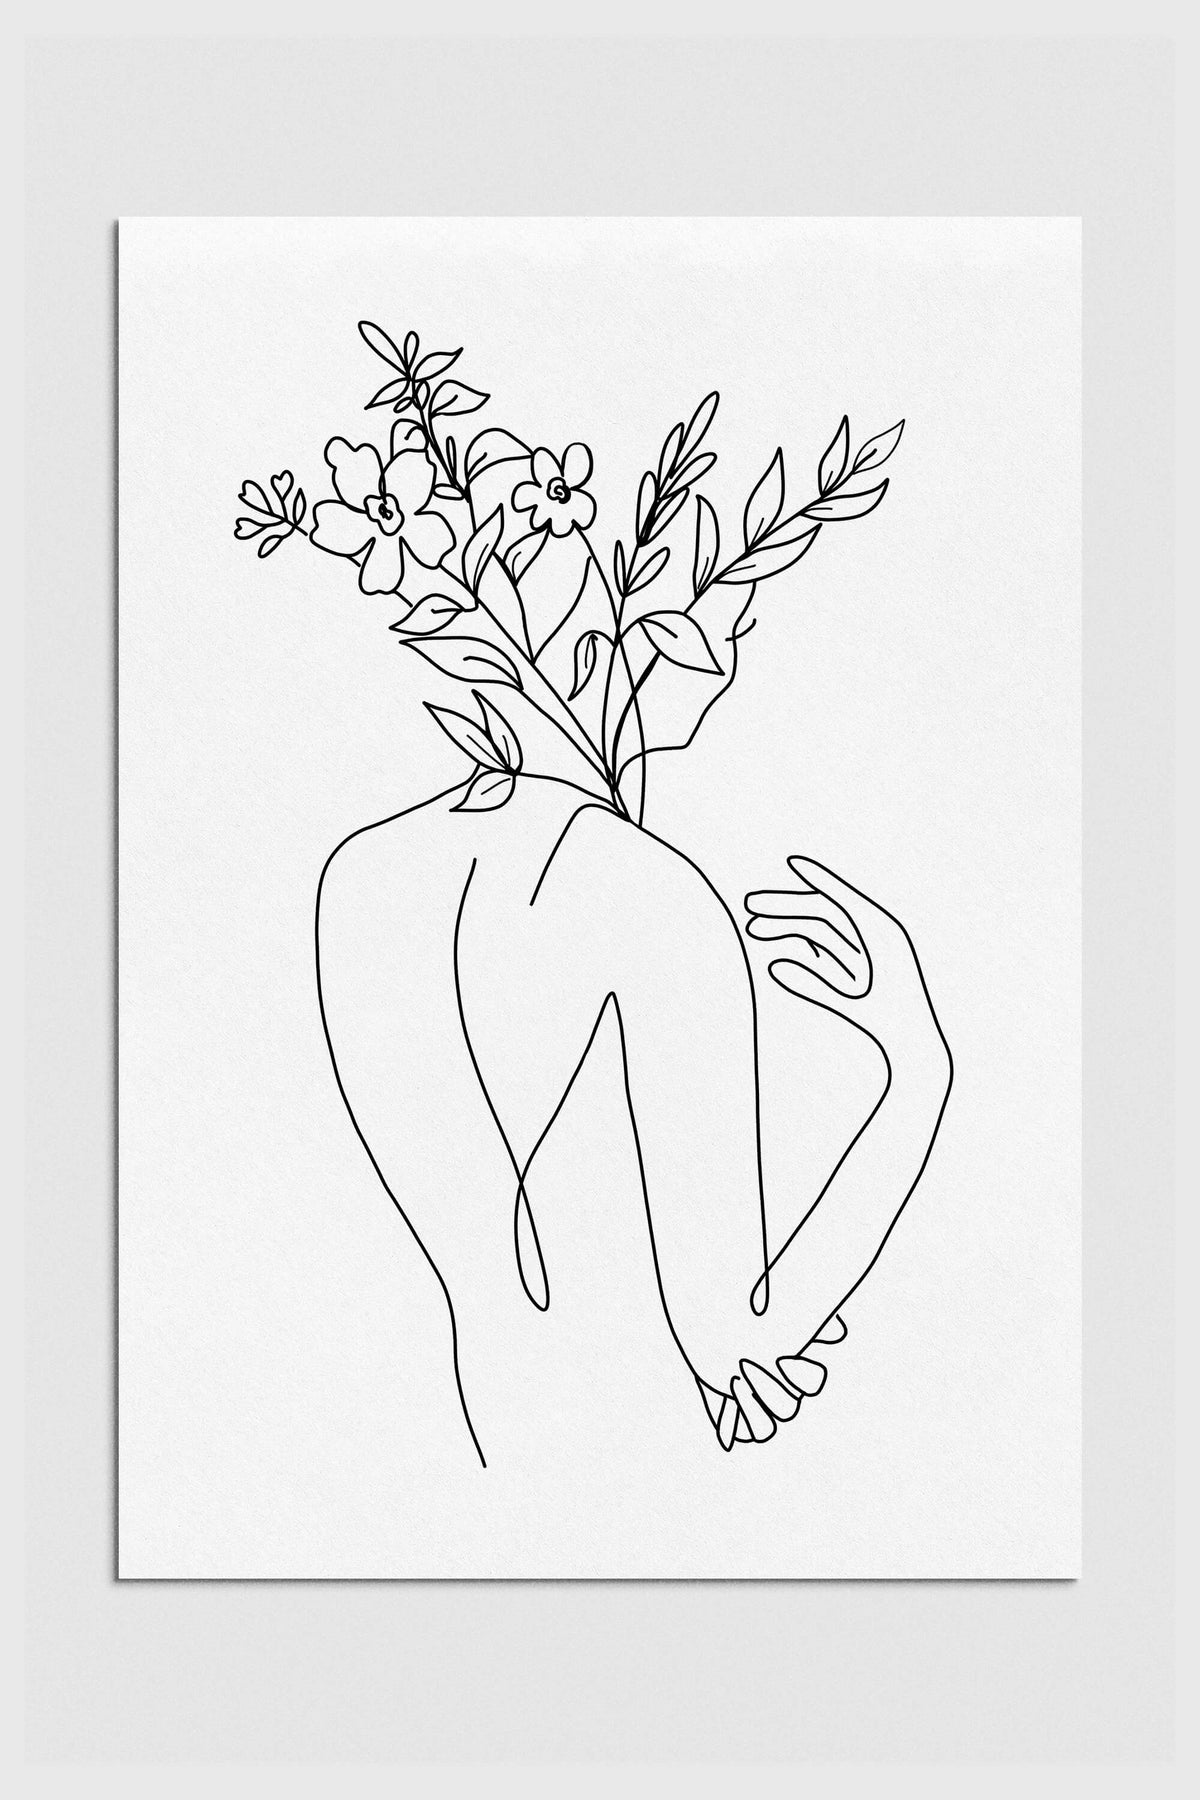 Botanical woman's back line art in black and white. Elegant and empowering, this limited edition print captures the harmonious balance of nature-inspired beauty. Perfect for bedroom wall decor.